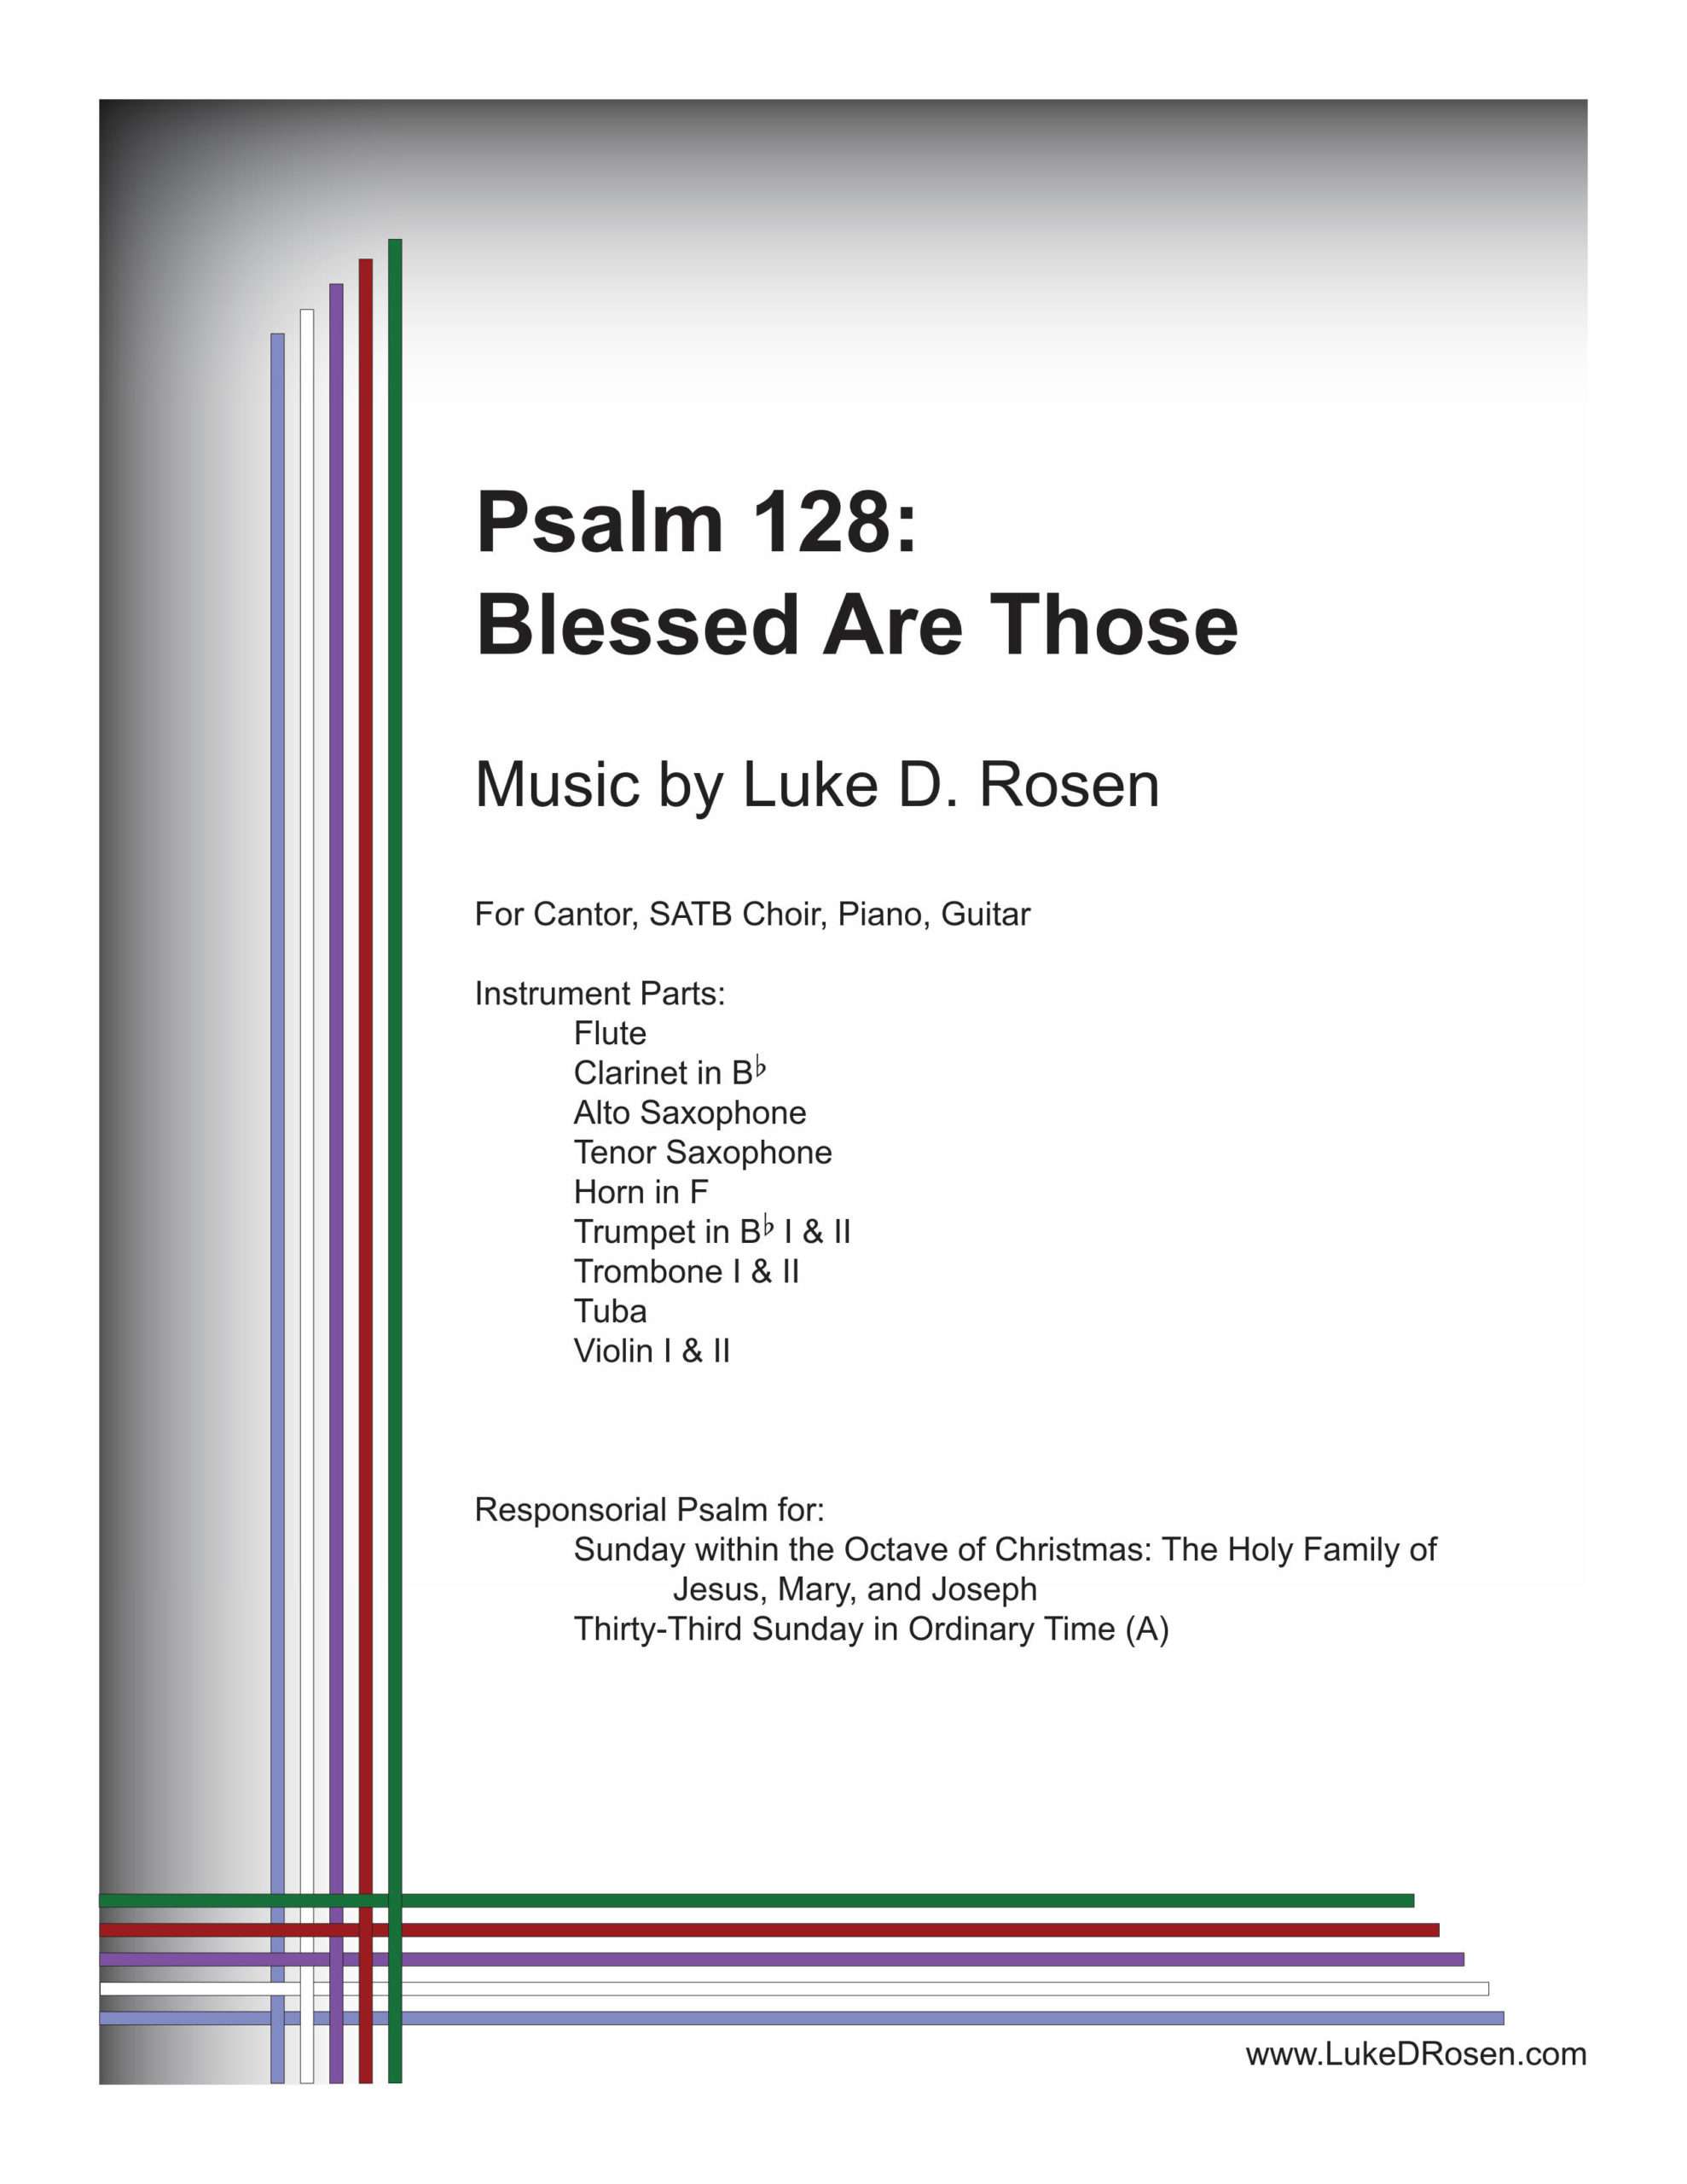 Psalm 128 – Blessed Are Those (Rosen)